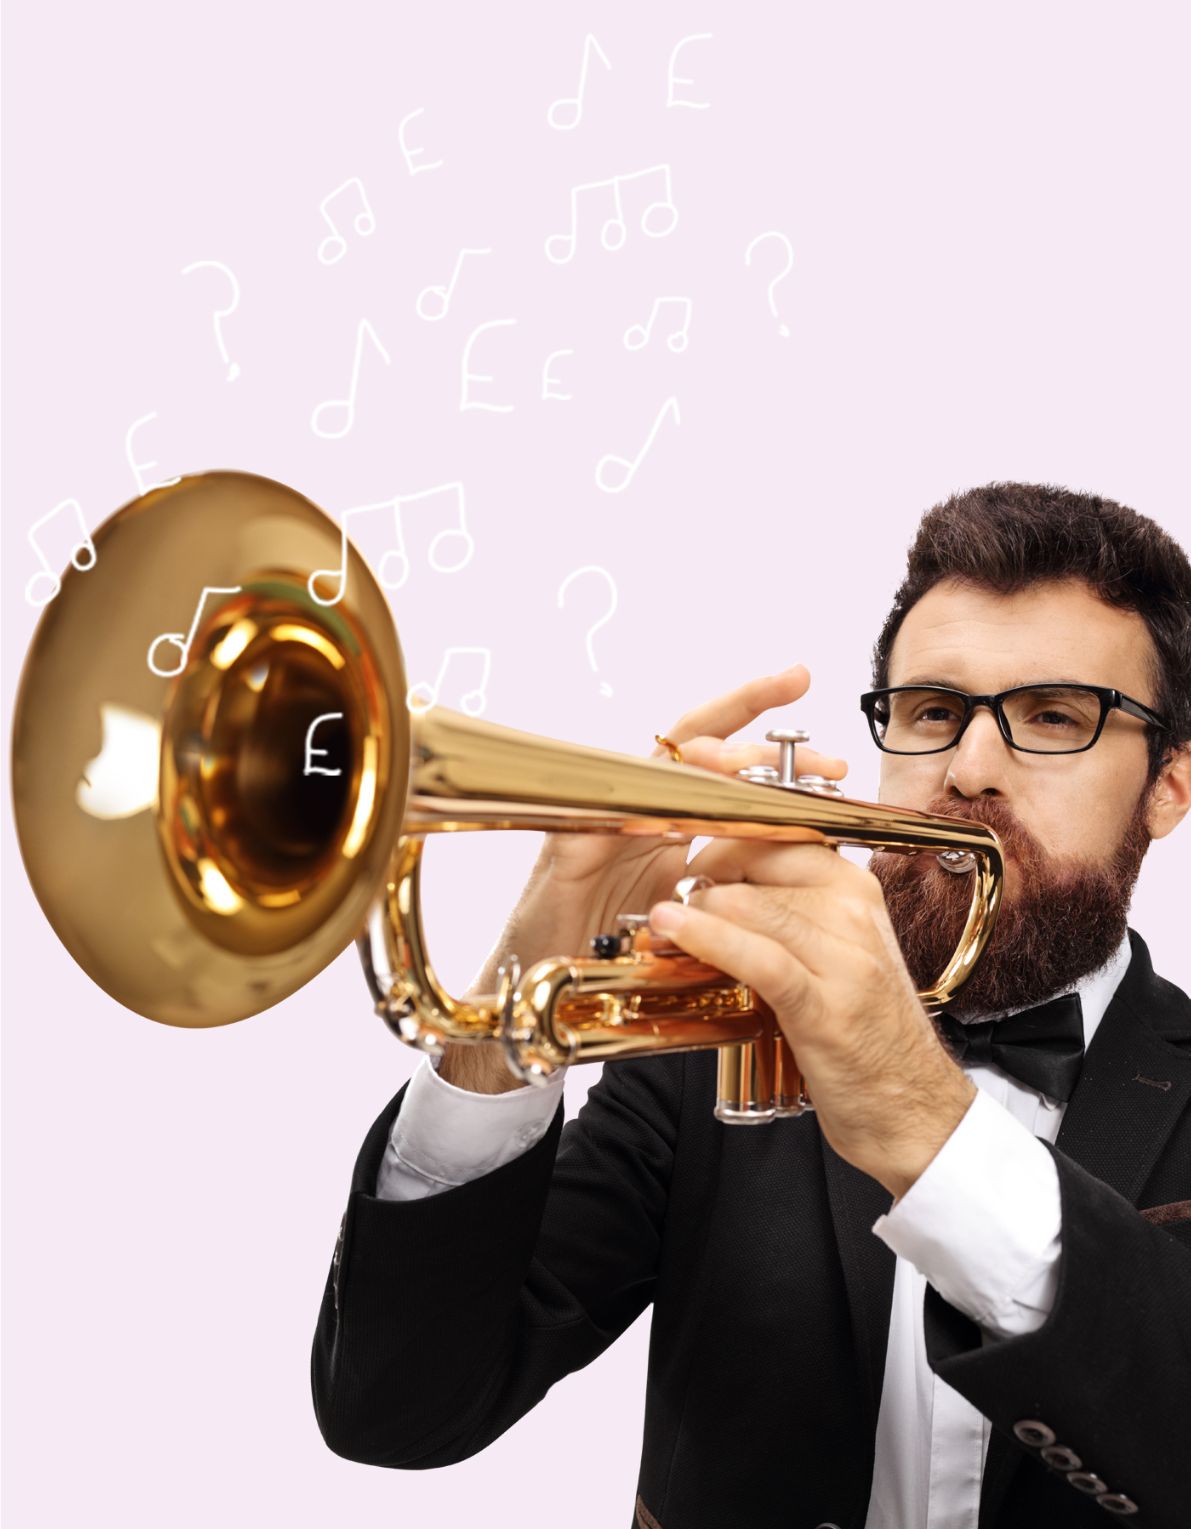 A man plays a trumpet against a pale pink background, there are white notes hanging in the air above him. The man is dark haired, Caucasian, and wears a black suit with a white shirt. For blog: Question?